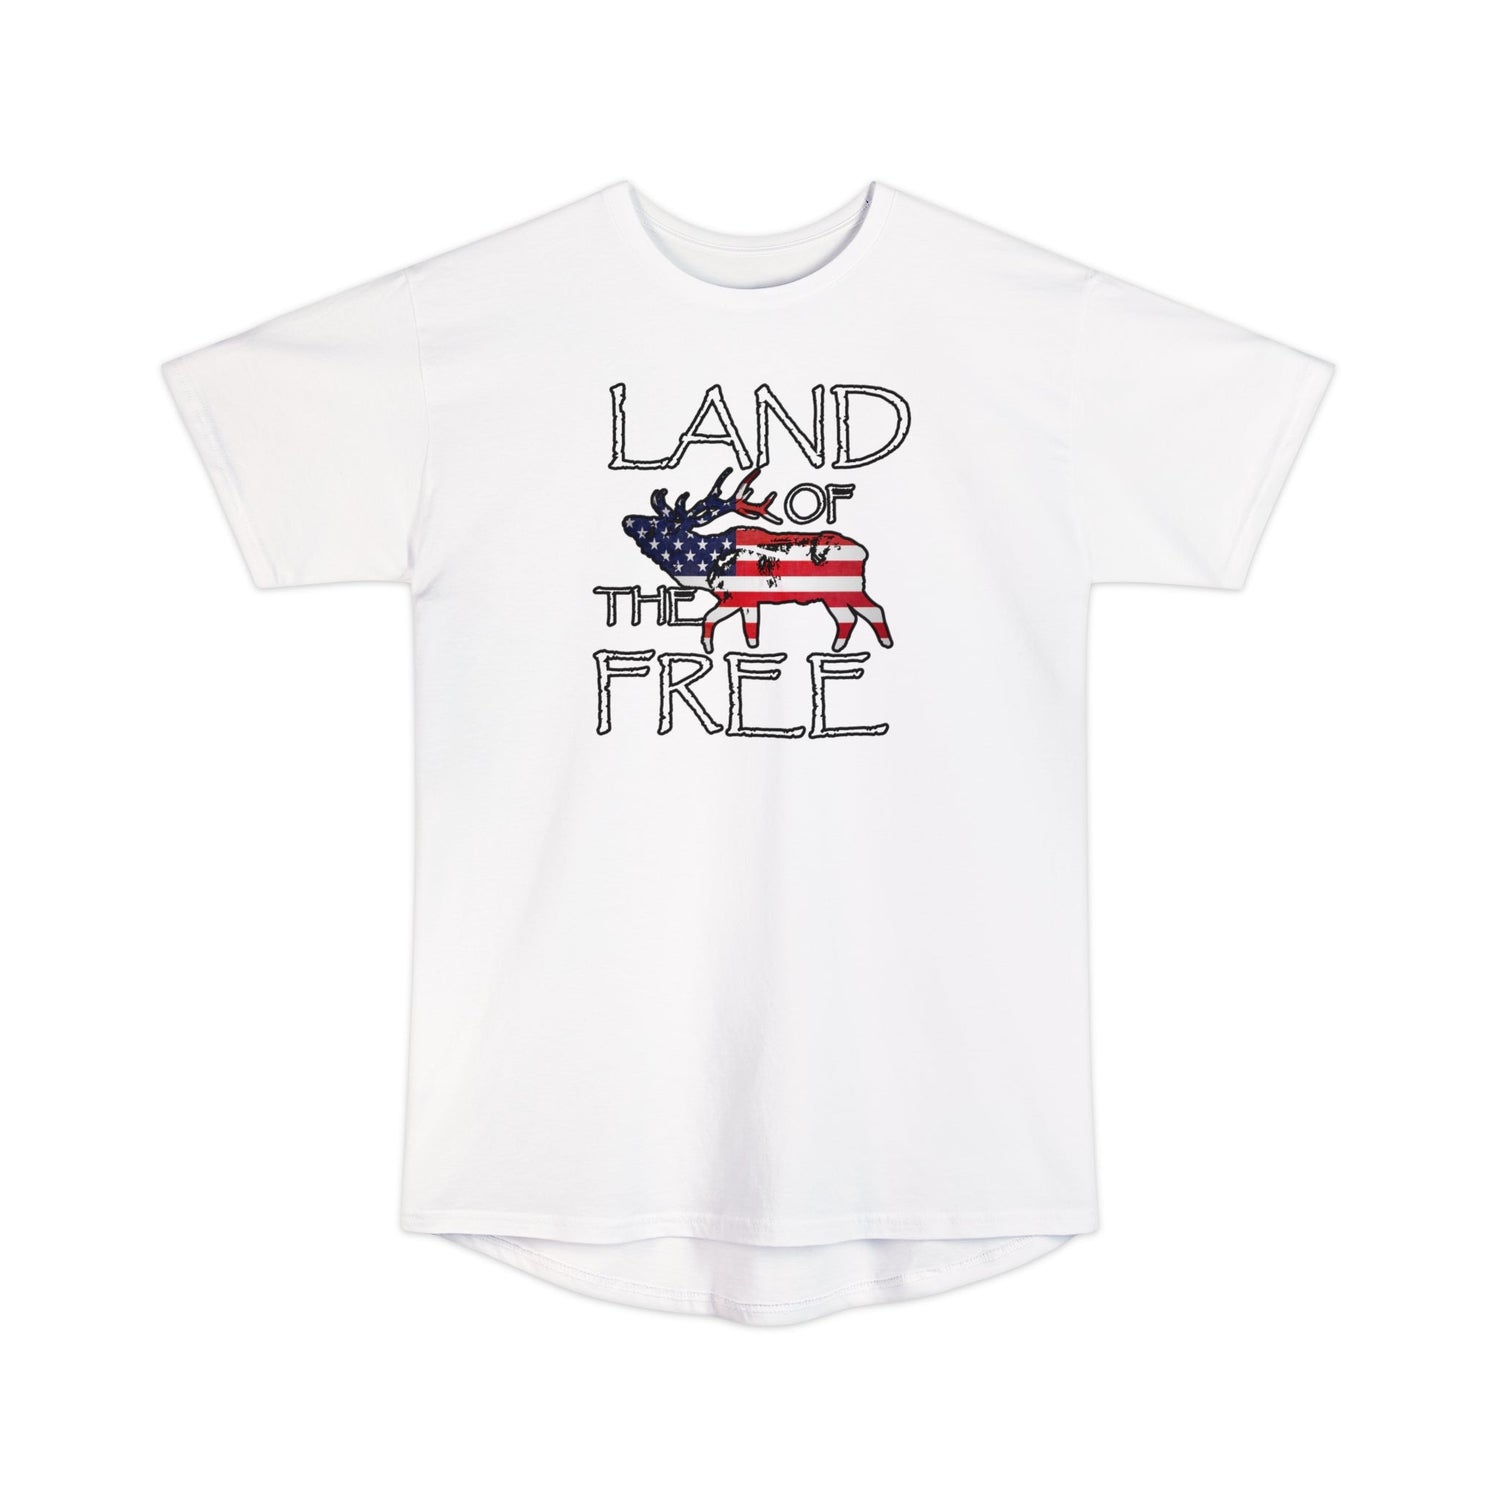 Athletic tall patriotic elk hunting t-shirt, color white, front design placement